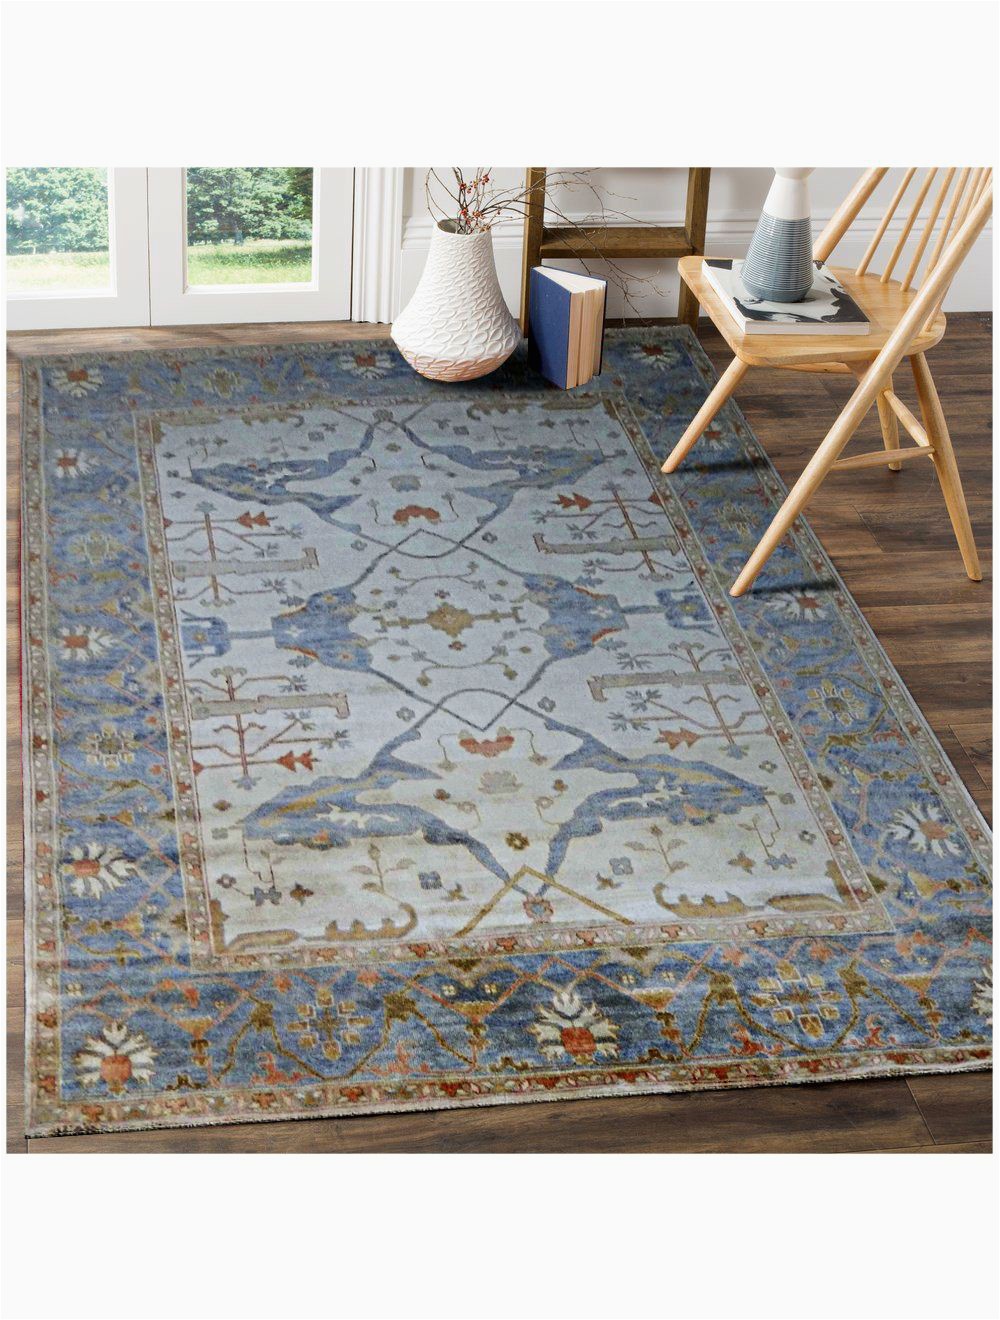 Blue Hand Knotted Wool Rug Aldo Persian Traditional Floral Blue Hand Knotted Wool Rug 4 X 6